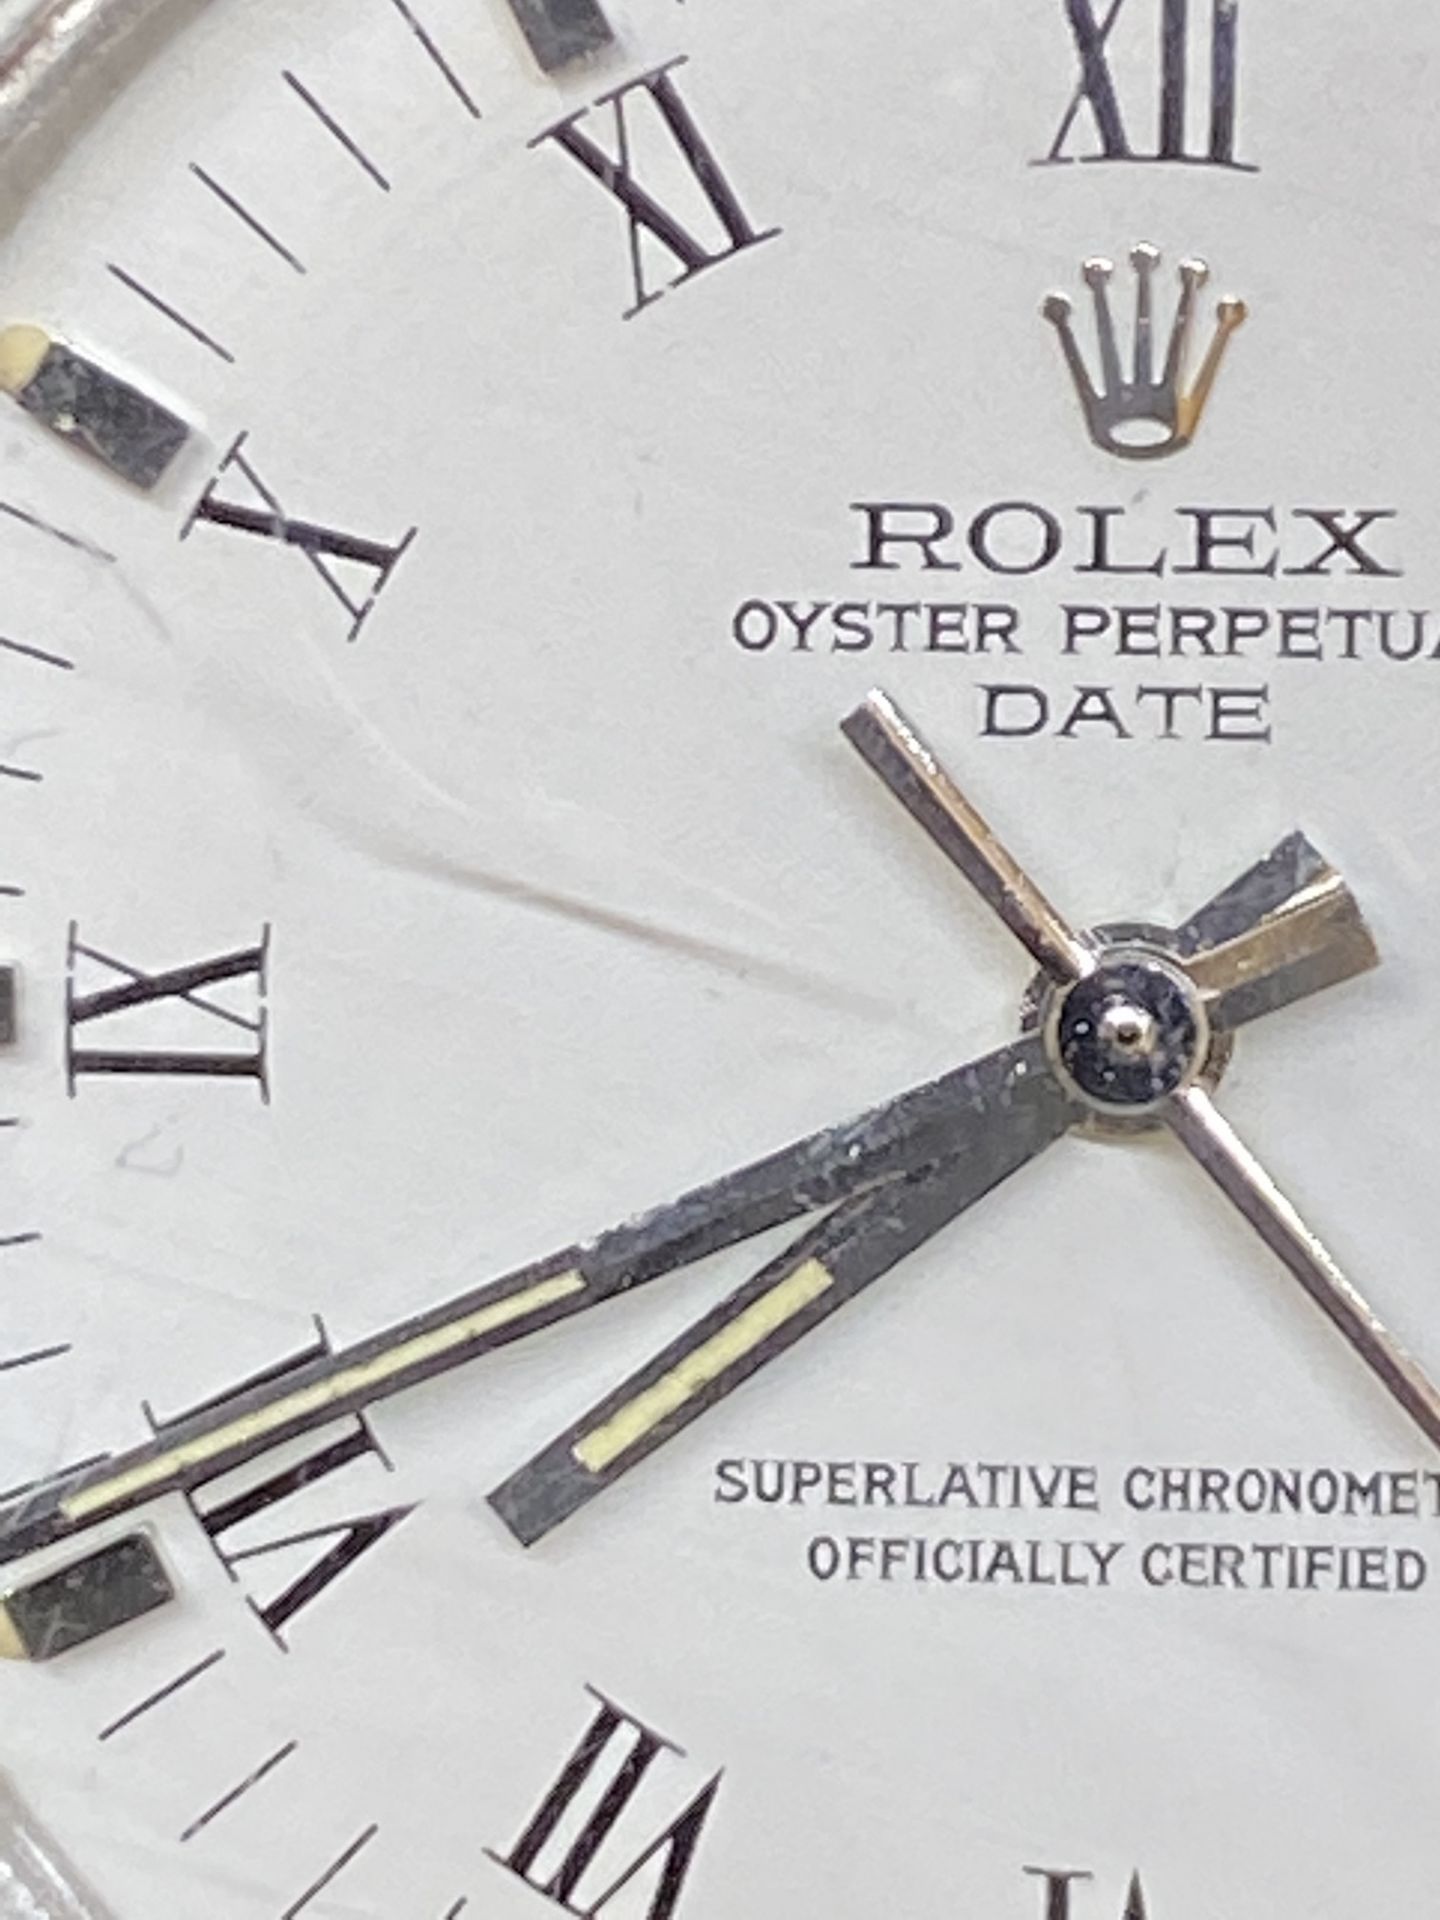 STAINLESS STEEL ROLEX OYSTER PERPETUAL DATE WATCH - Image 3 of 11